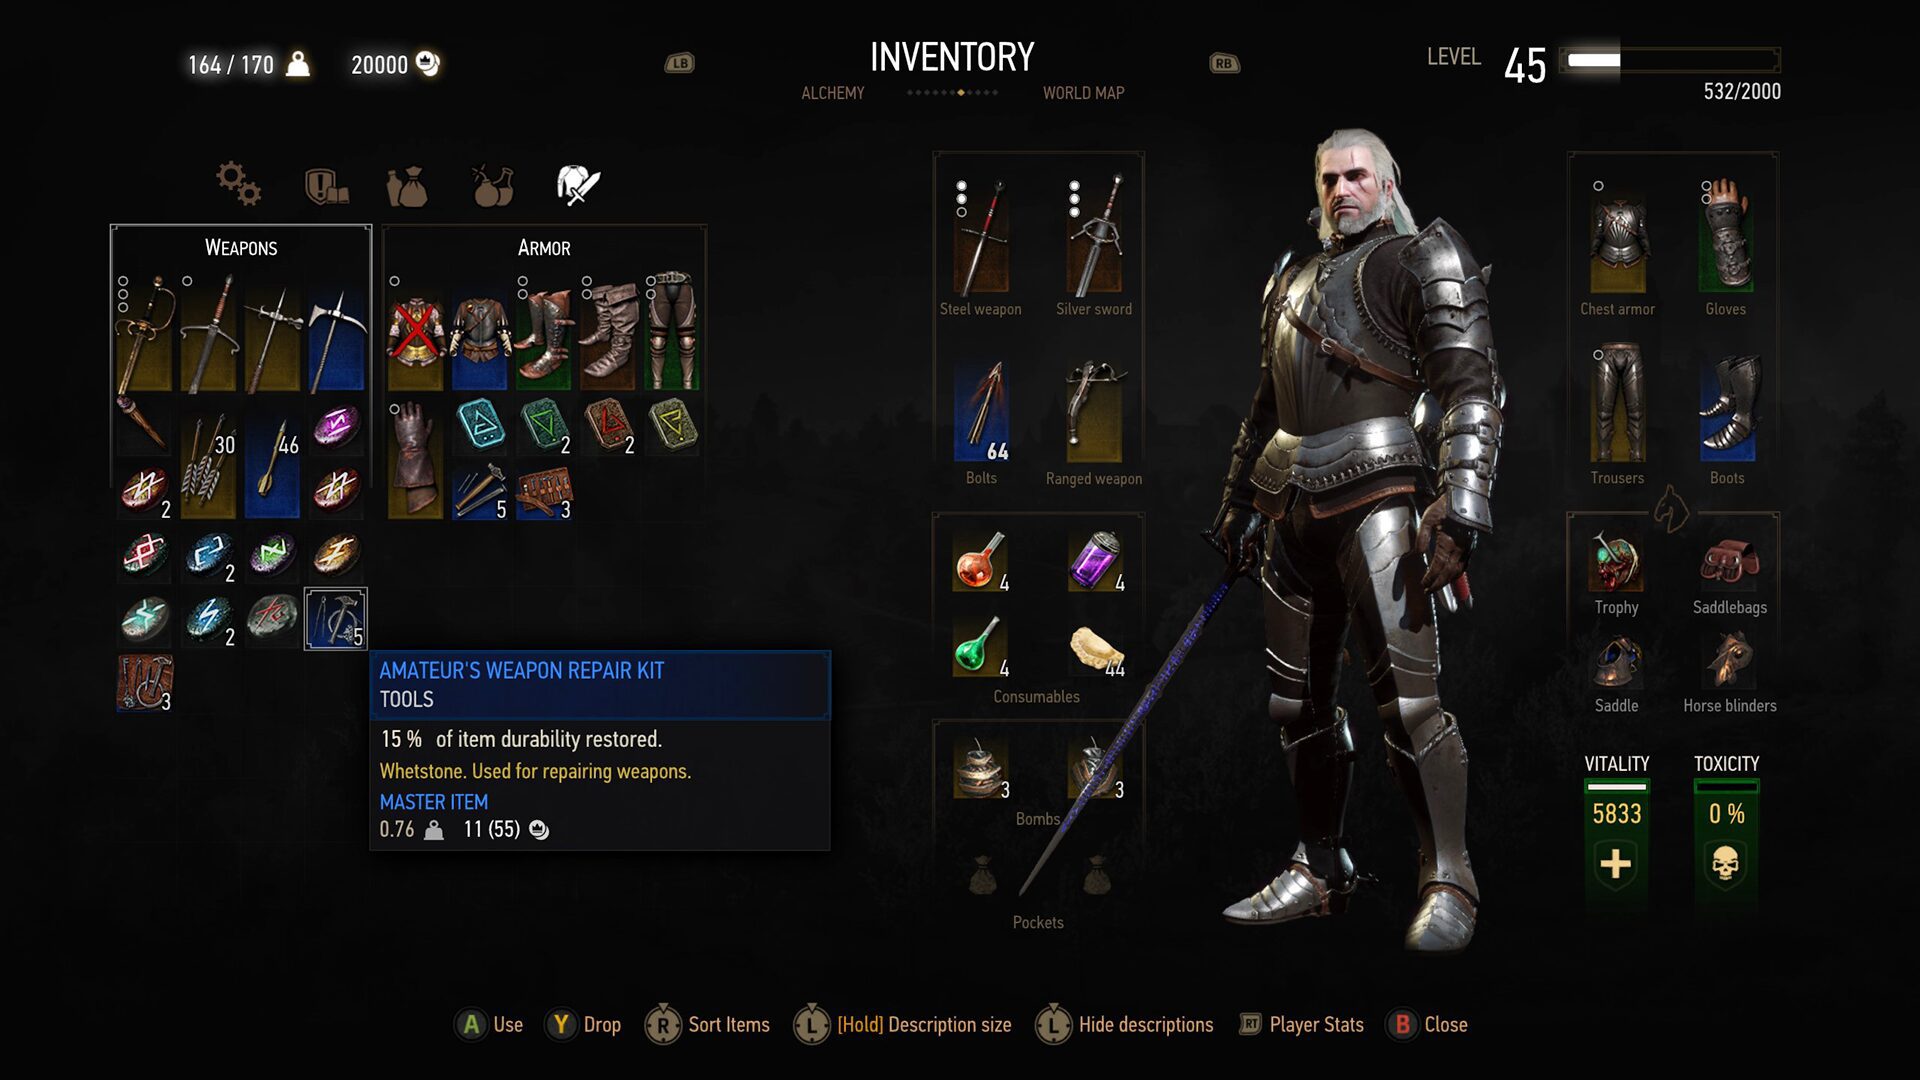 Screenshot of The Witcher 3 inventory